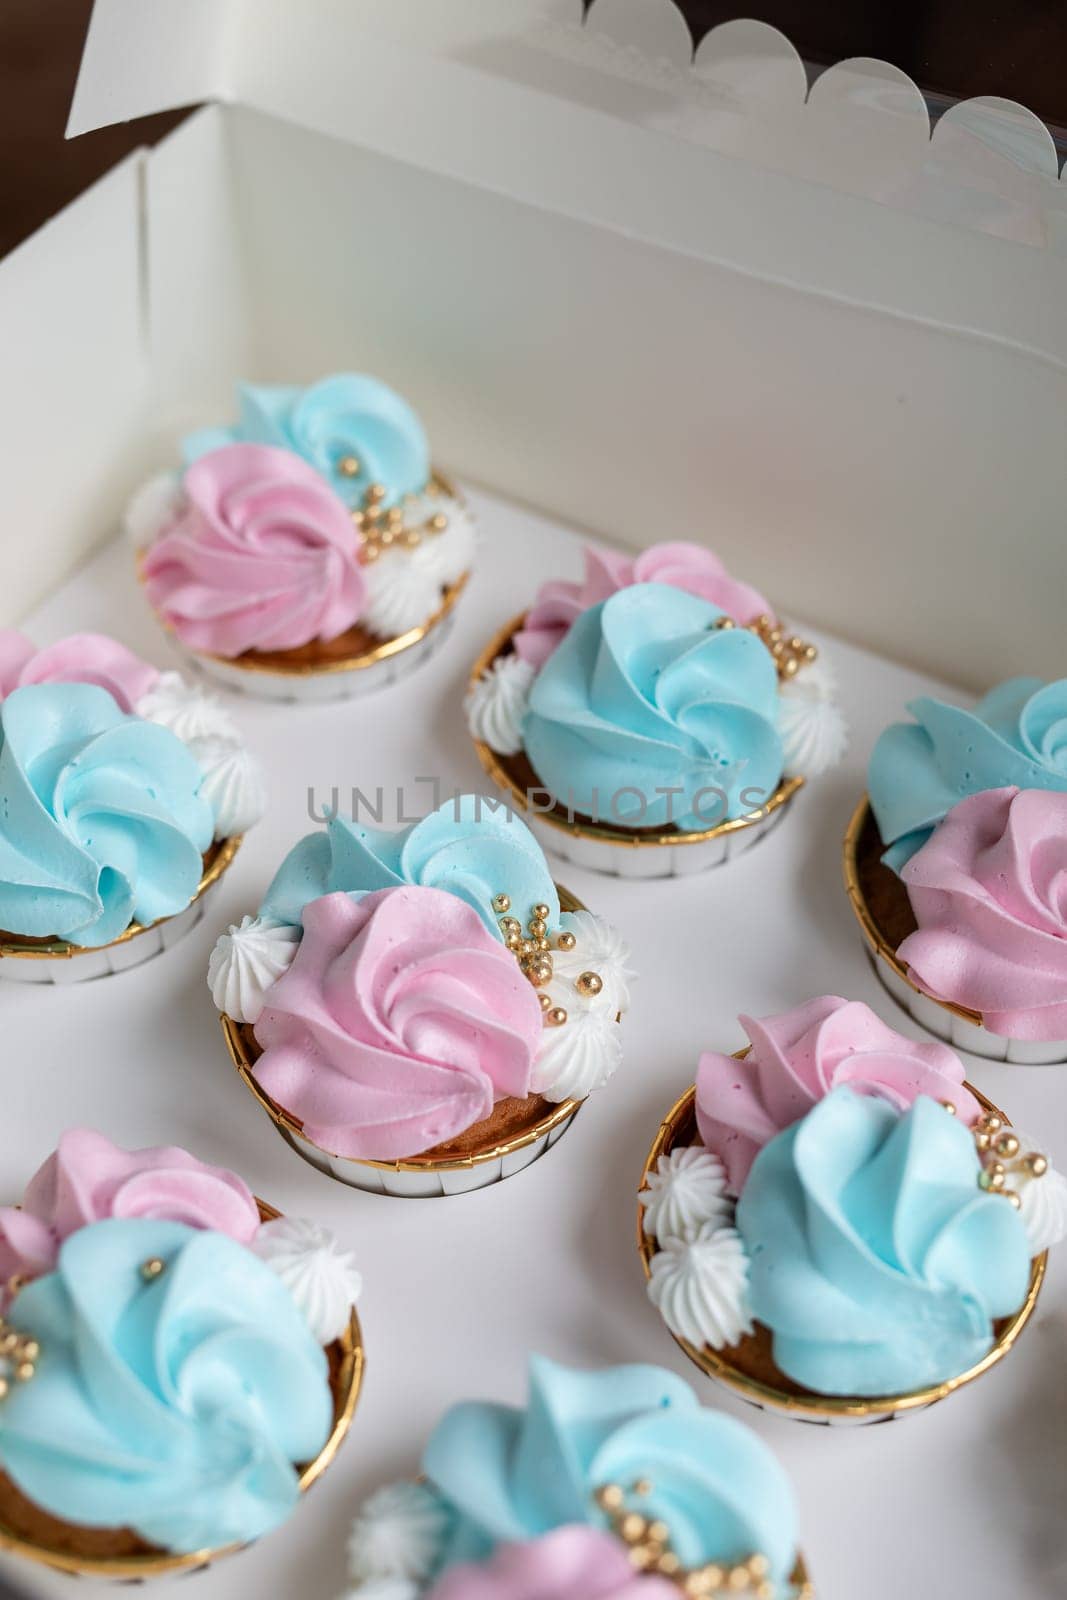 Cupcake blue and pink for gender party. boy or girl. delicious cupcakes with blue and pink cream, golden sparkles celebration concept when the gender of the child becomes known. Festive baby shower sweets concept by Annebel146